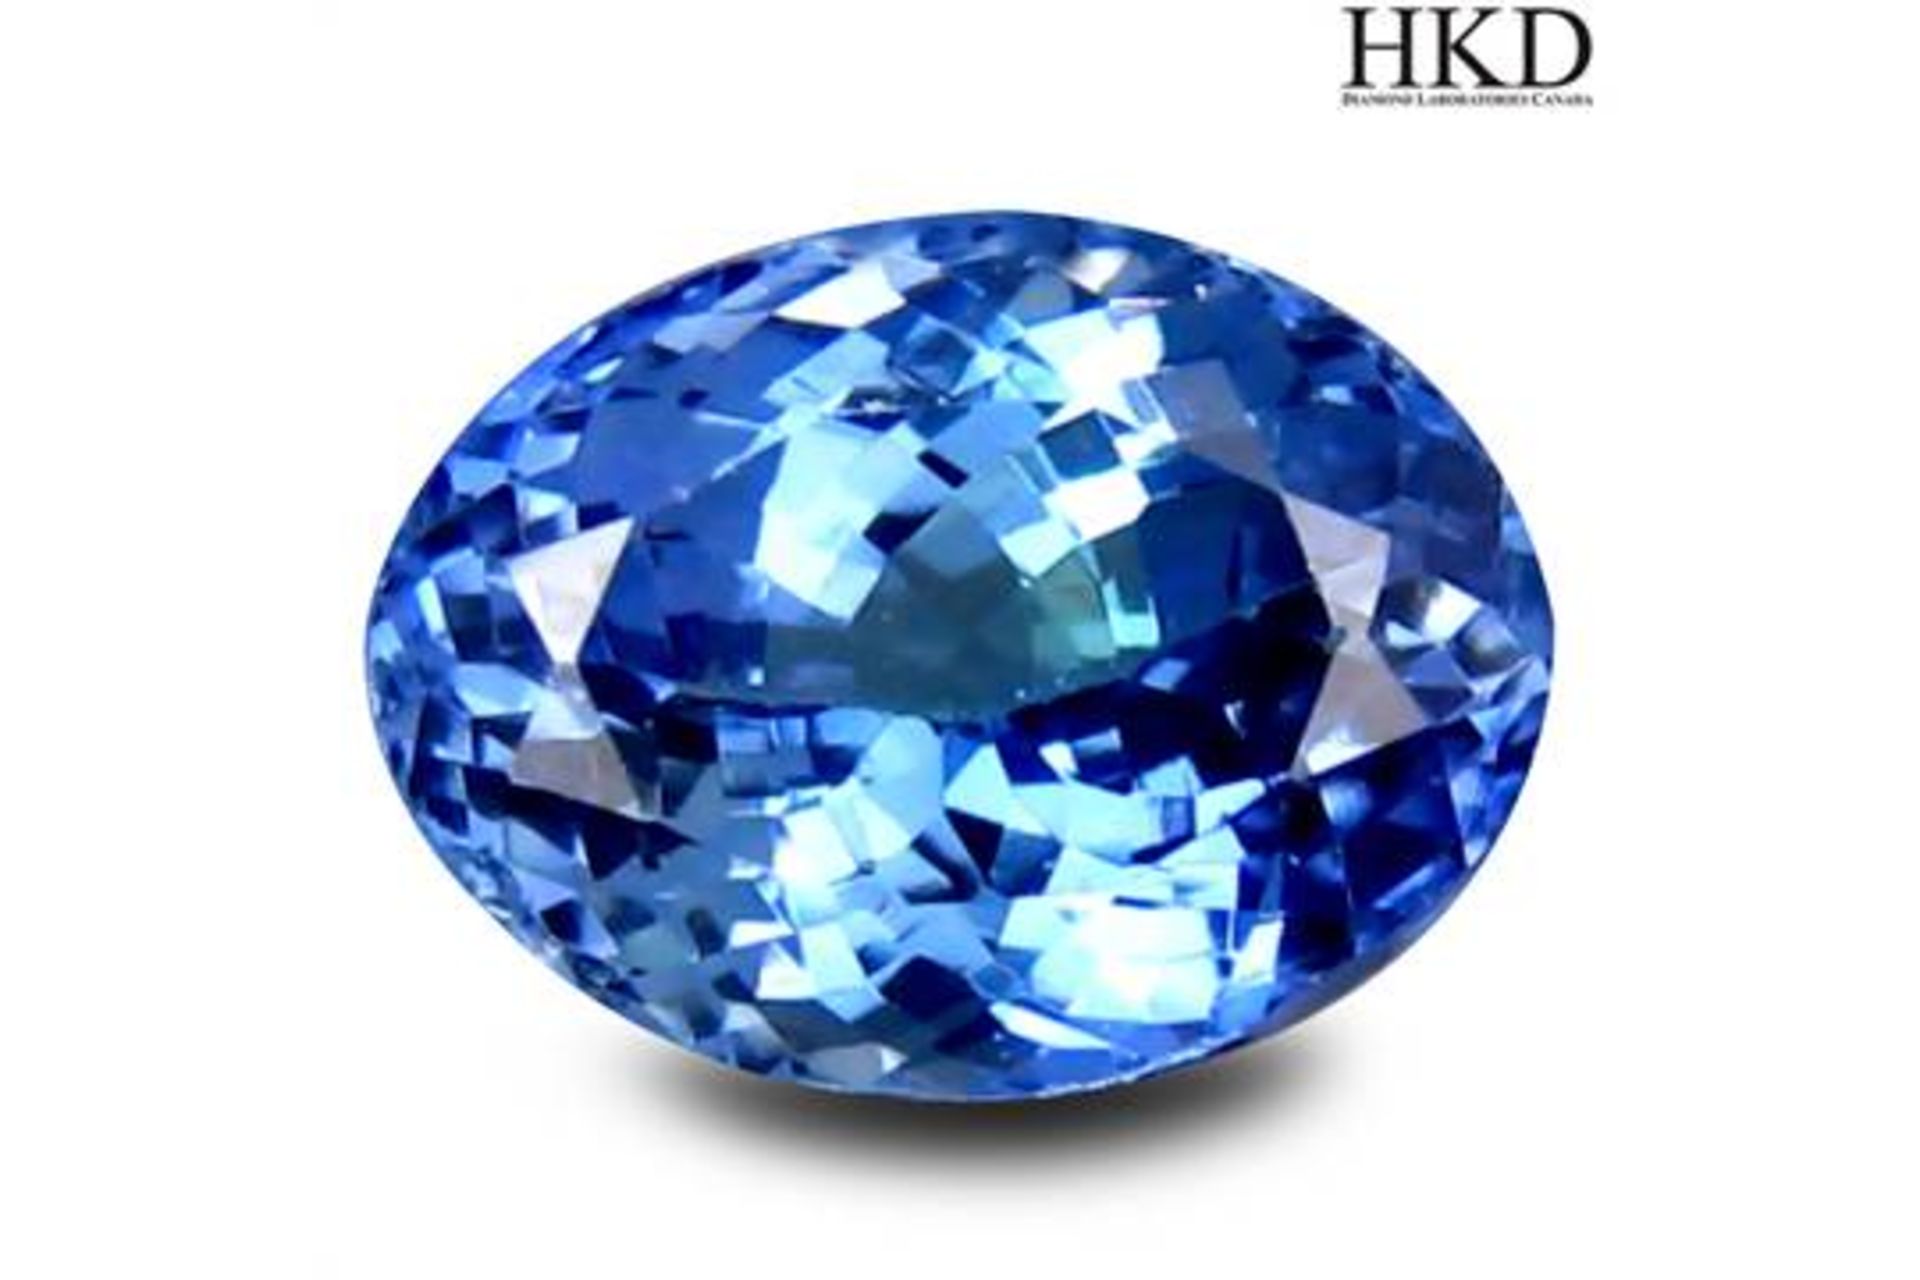 A Beautiful GIL Certified 2.22ct Oval Facetted Cut Natural Tanzanite Investment Gemstone, Retail